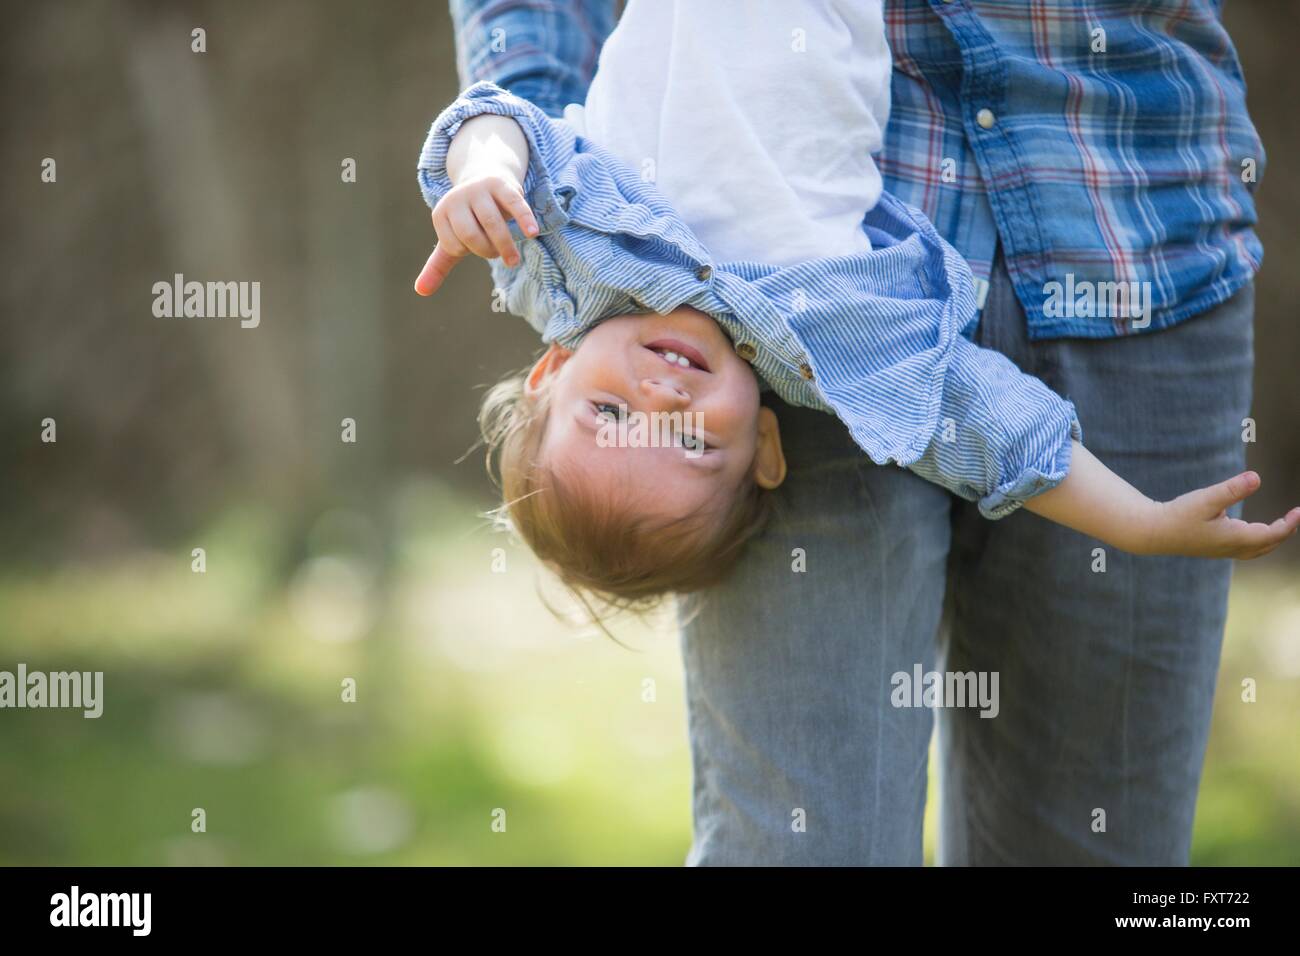 Low section of father hanging smiling baby boy upside down Stock Photo